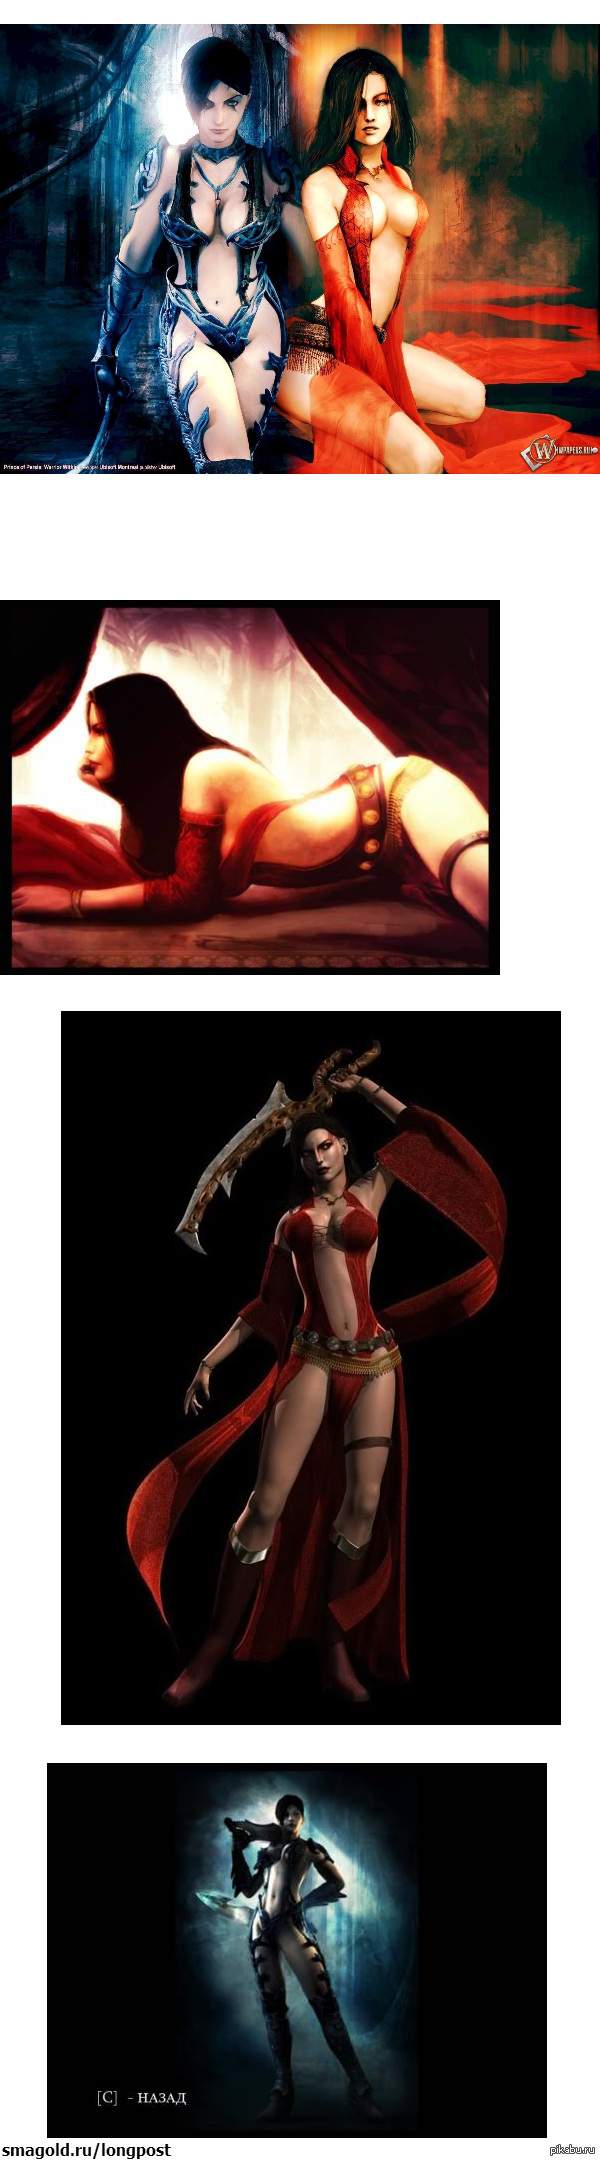 Girls from Prince of Persia: Warrior Within - Prince of Persia, Almost strawberry, Shadi, Kaylina, Longpost